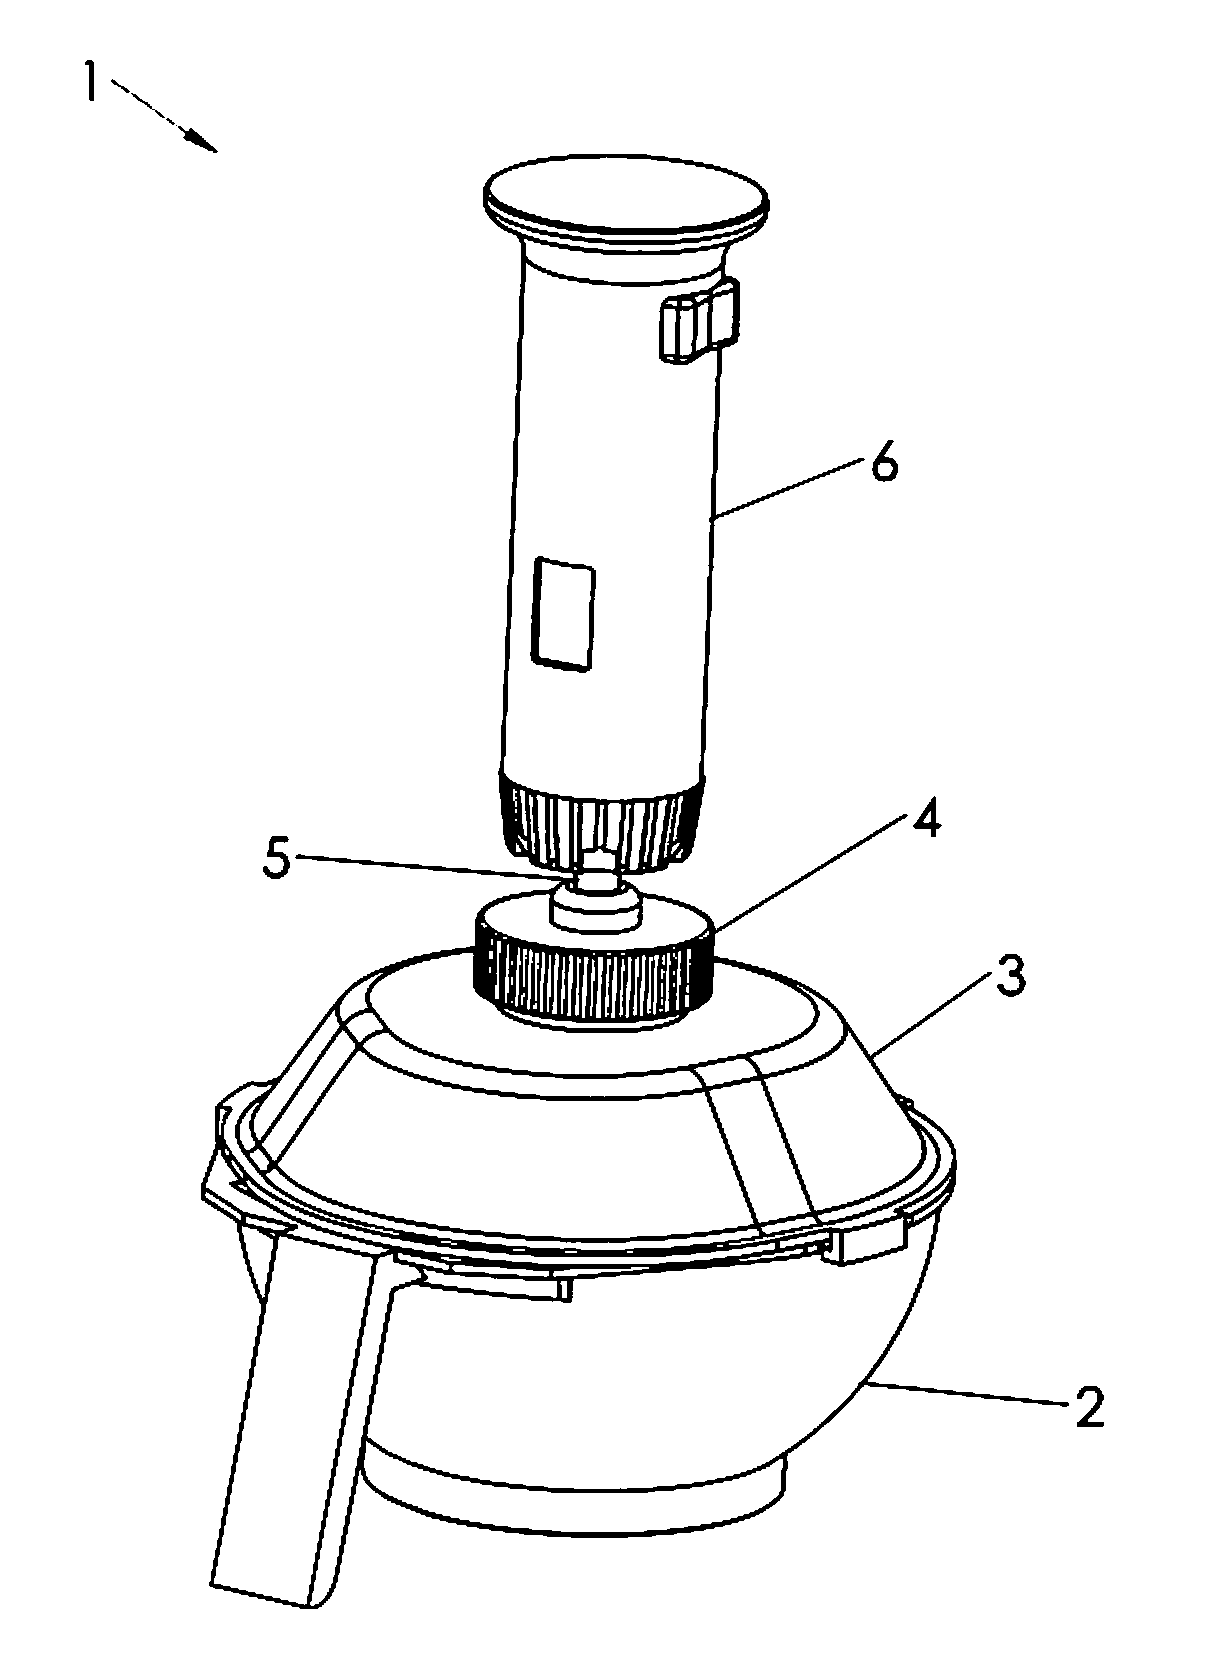 Apparatus for mixing hair colorant chemicals